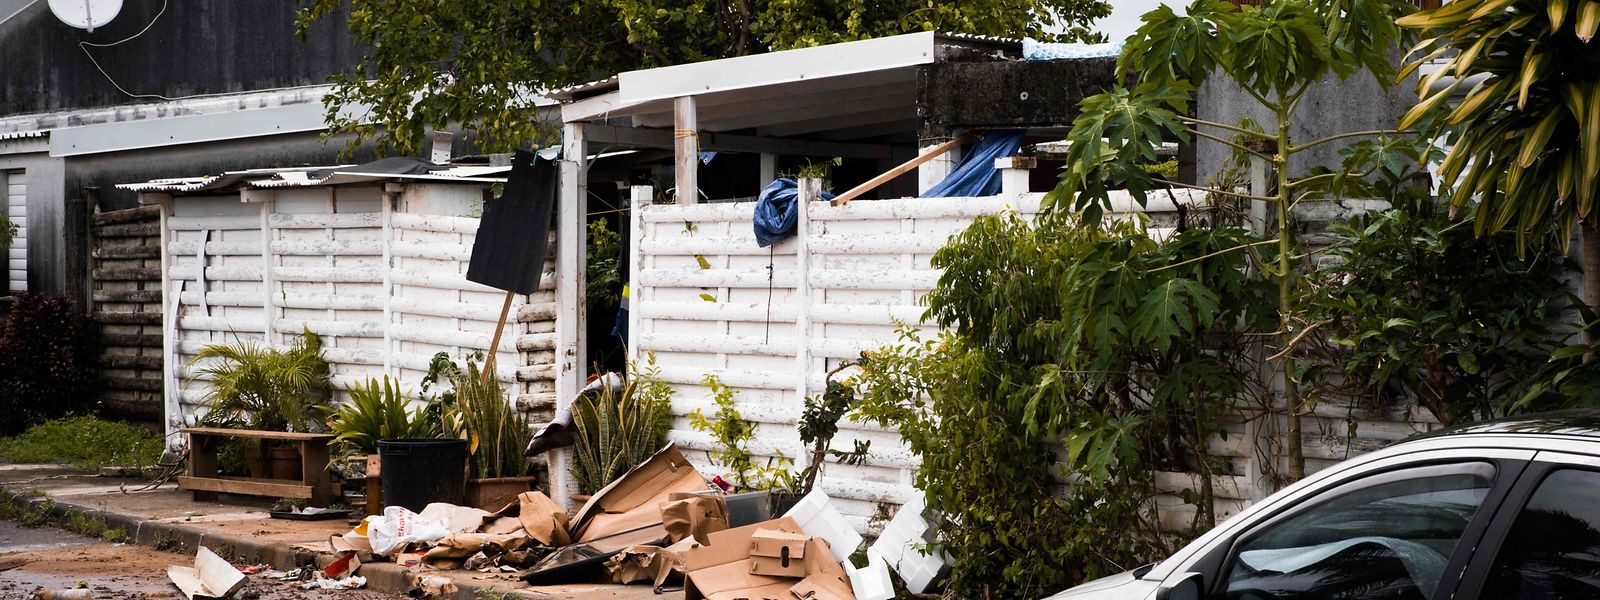 This photograph taken on September 18, 2022 shows the entrance of a home with damaged goods and debris after the passage of Hurricane Fiona in Goyave, on the French island of Guadeloupe. (Photo by Carla Bernhardt / AFP)